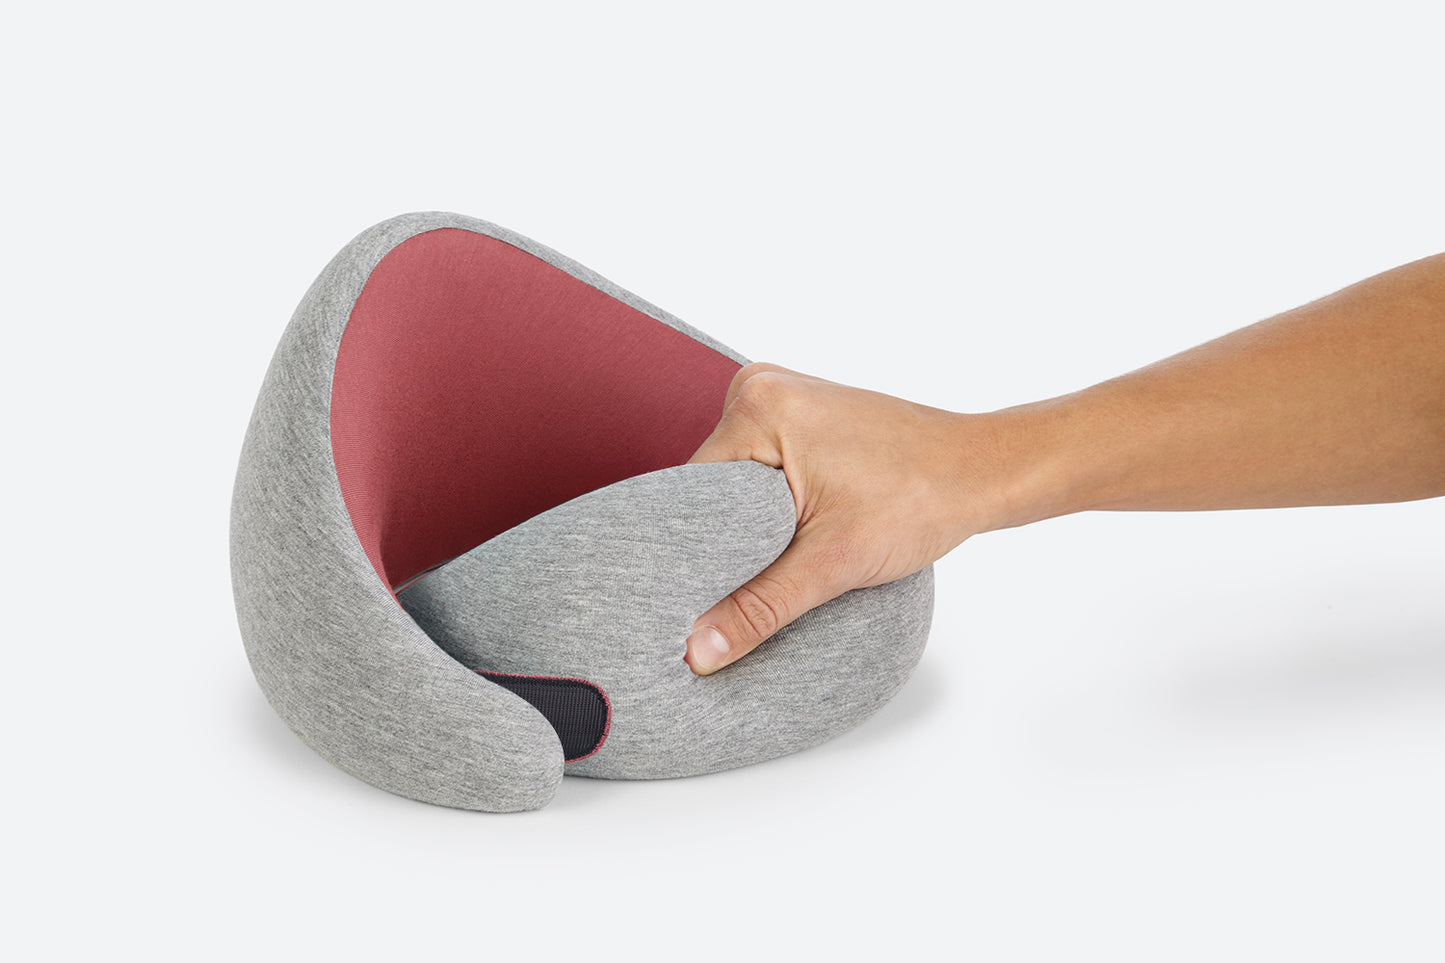 Woman Pressing In To The Dreamtastic Neck Pillow.